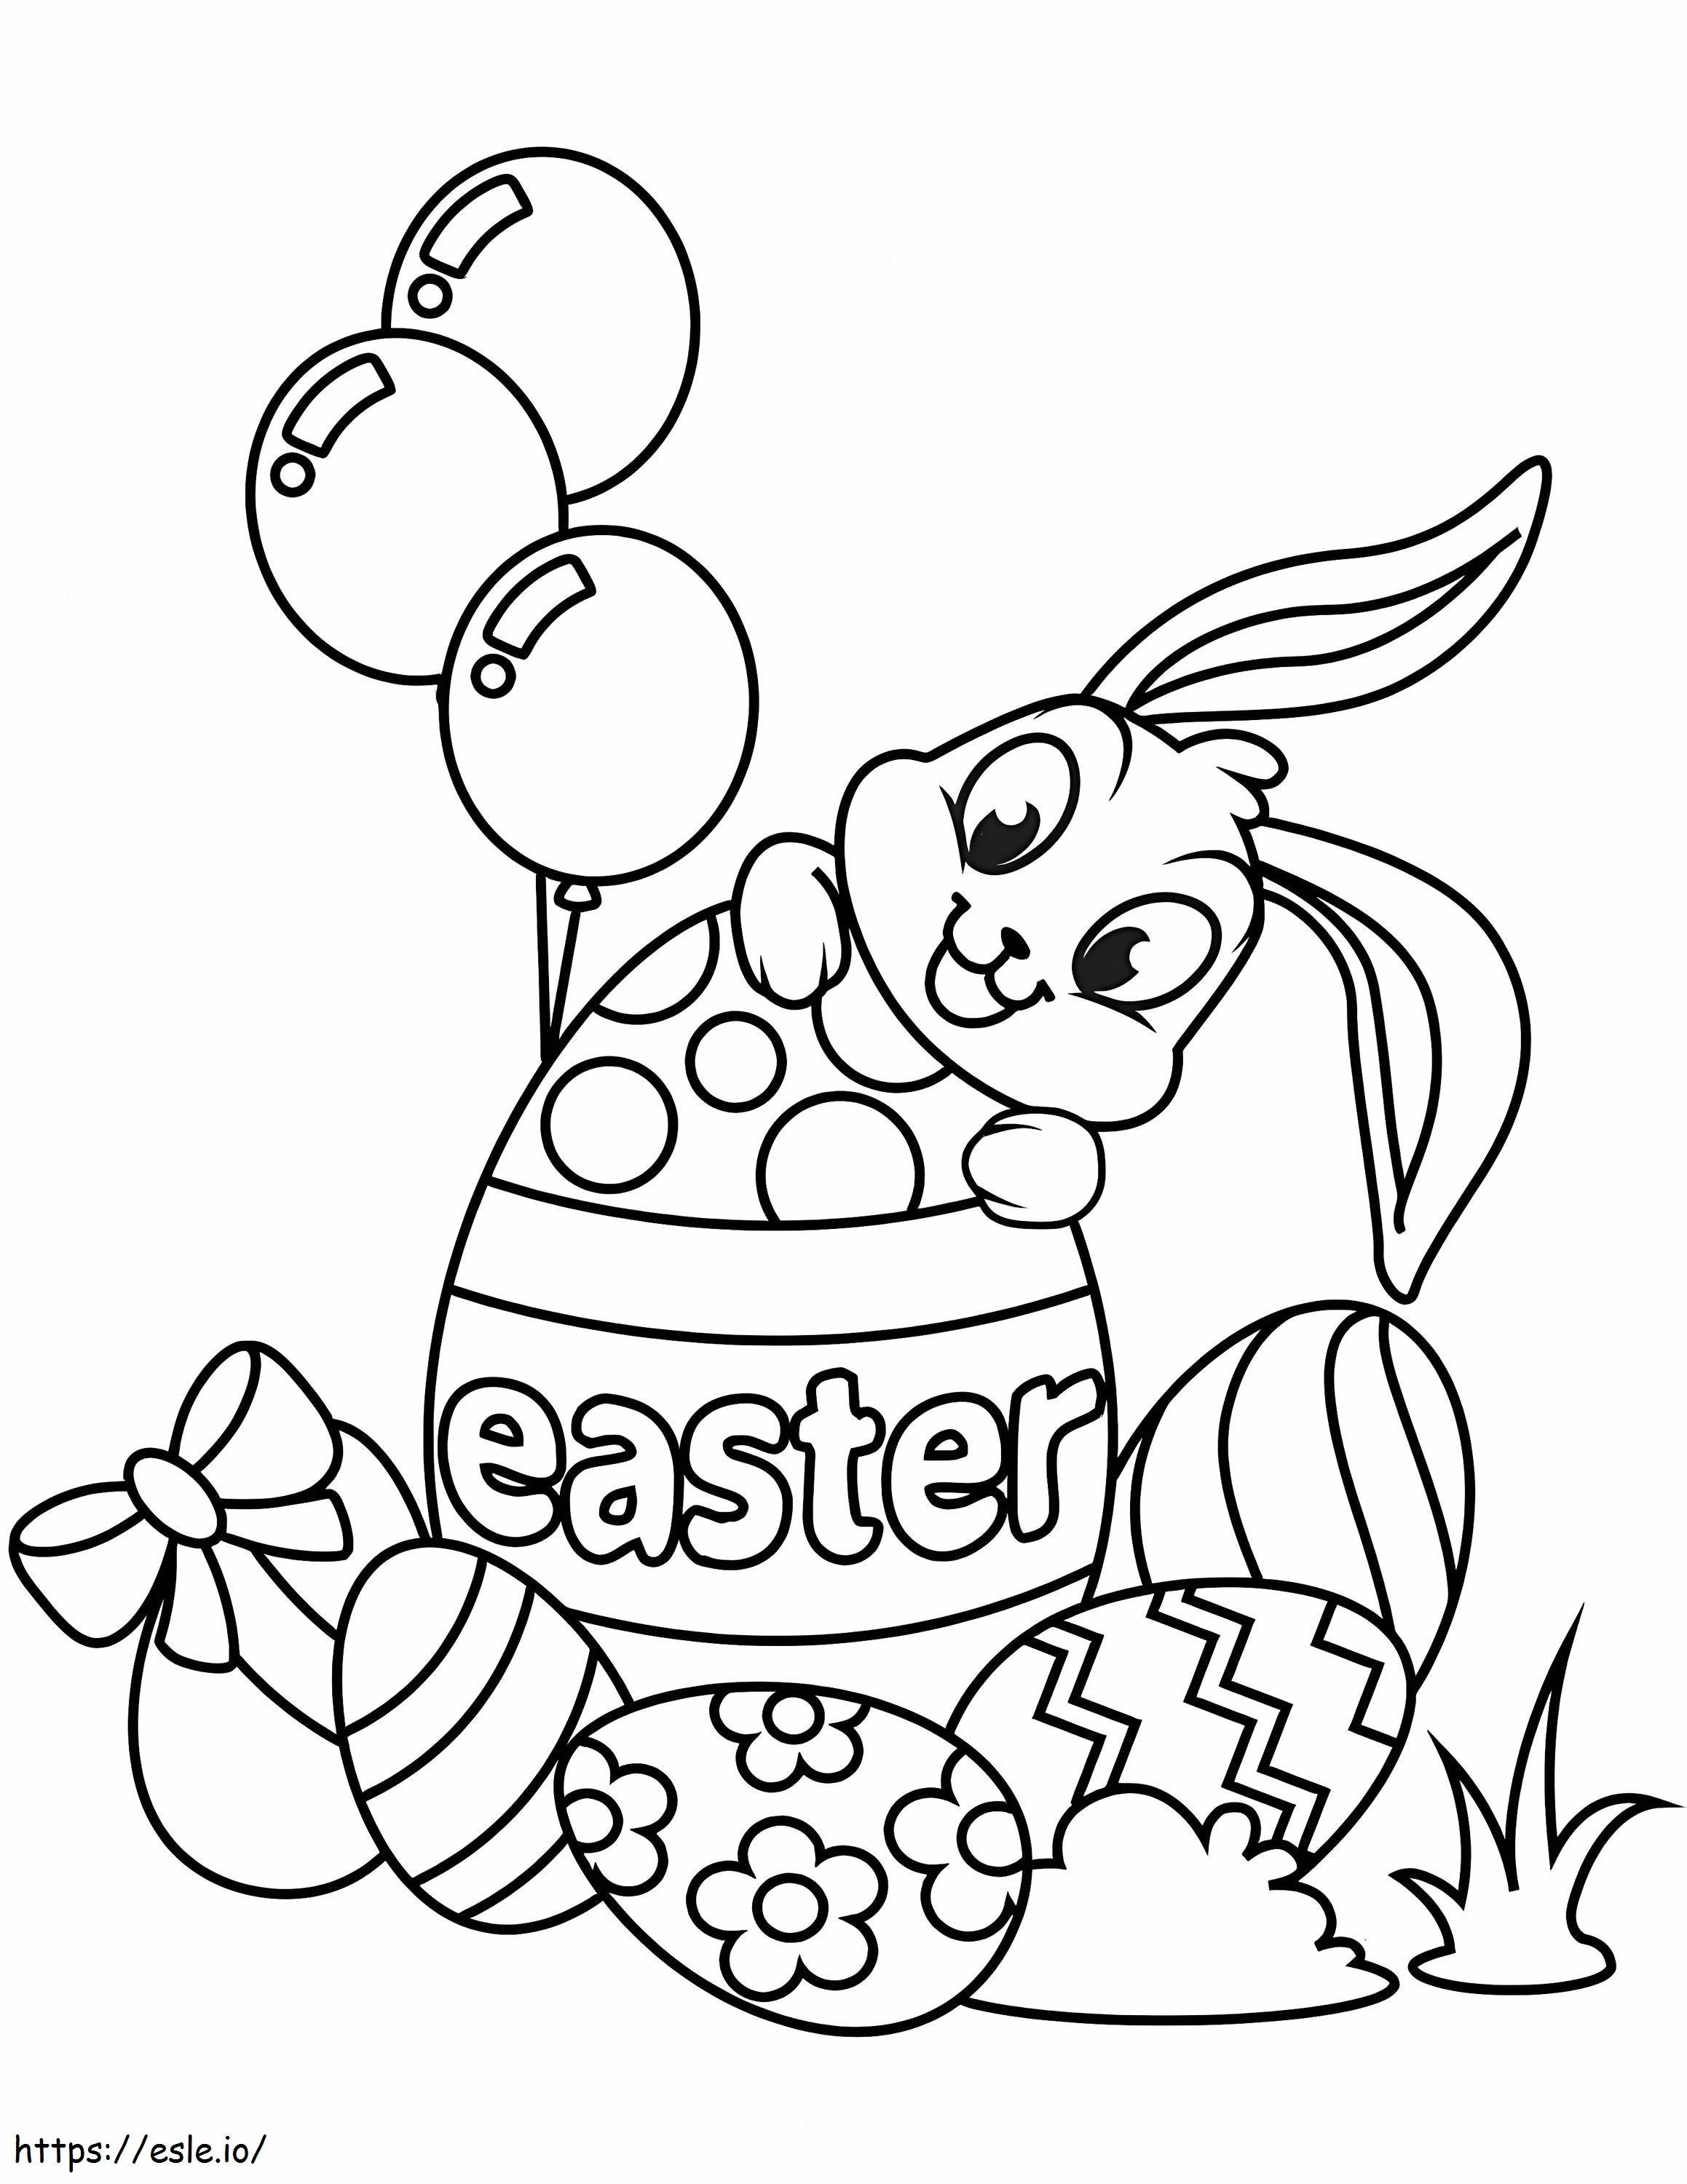 Easter Rabbit With Balloons coloring page